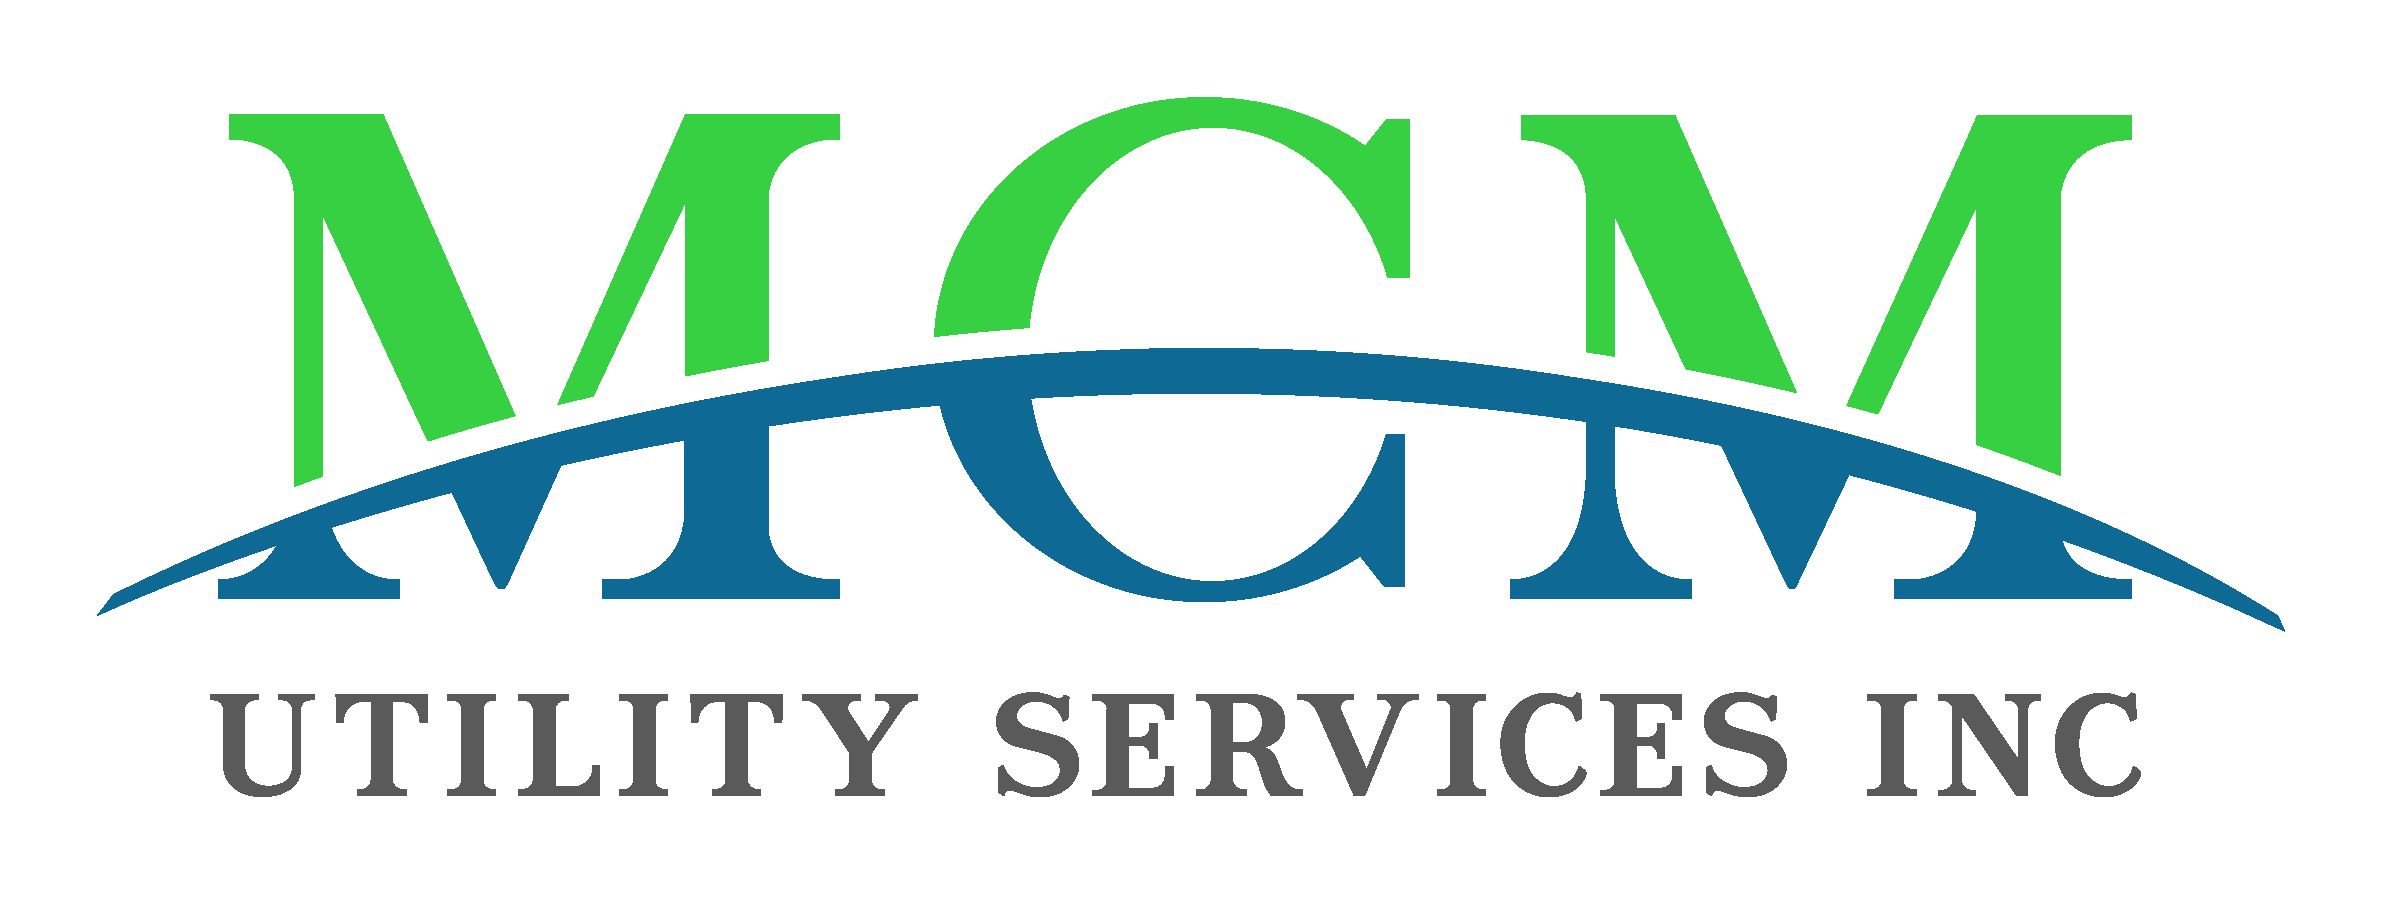 MCM Utility Services - Clean.png